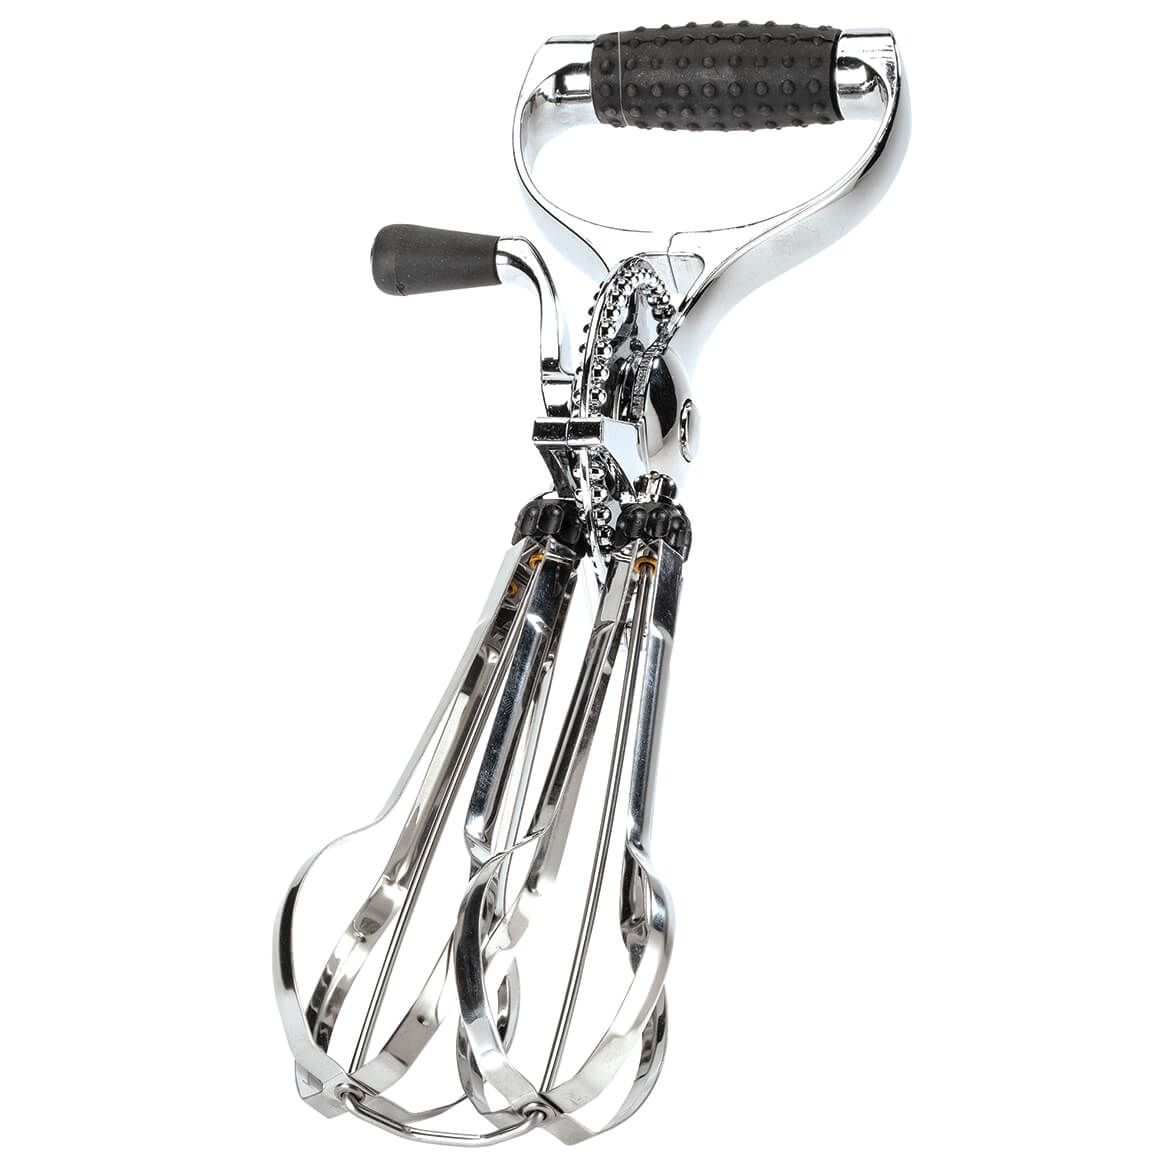 Hand Held Egg Beater by Home Marketplace + '-' + 370746